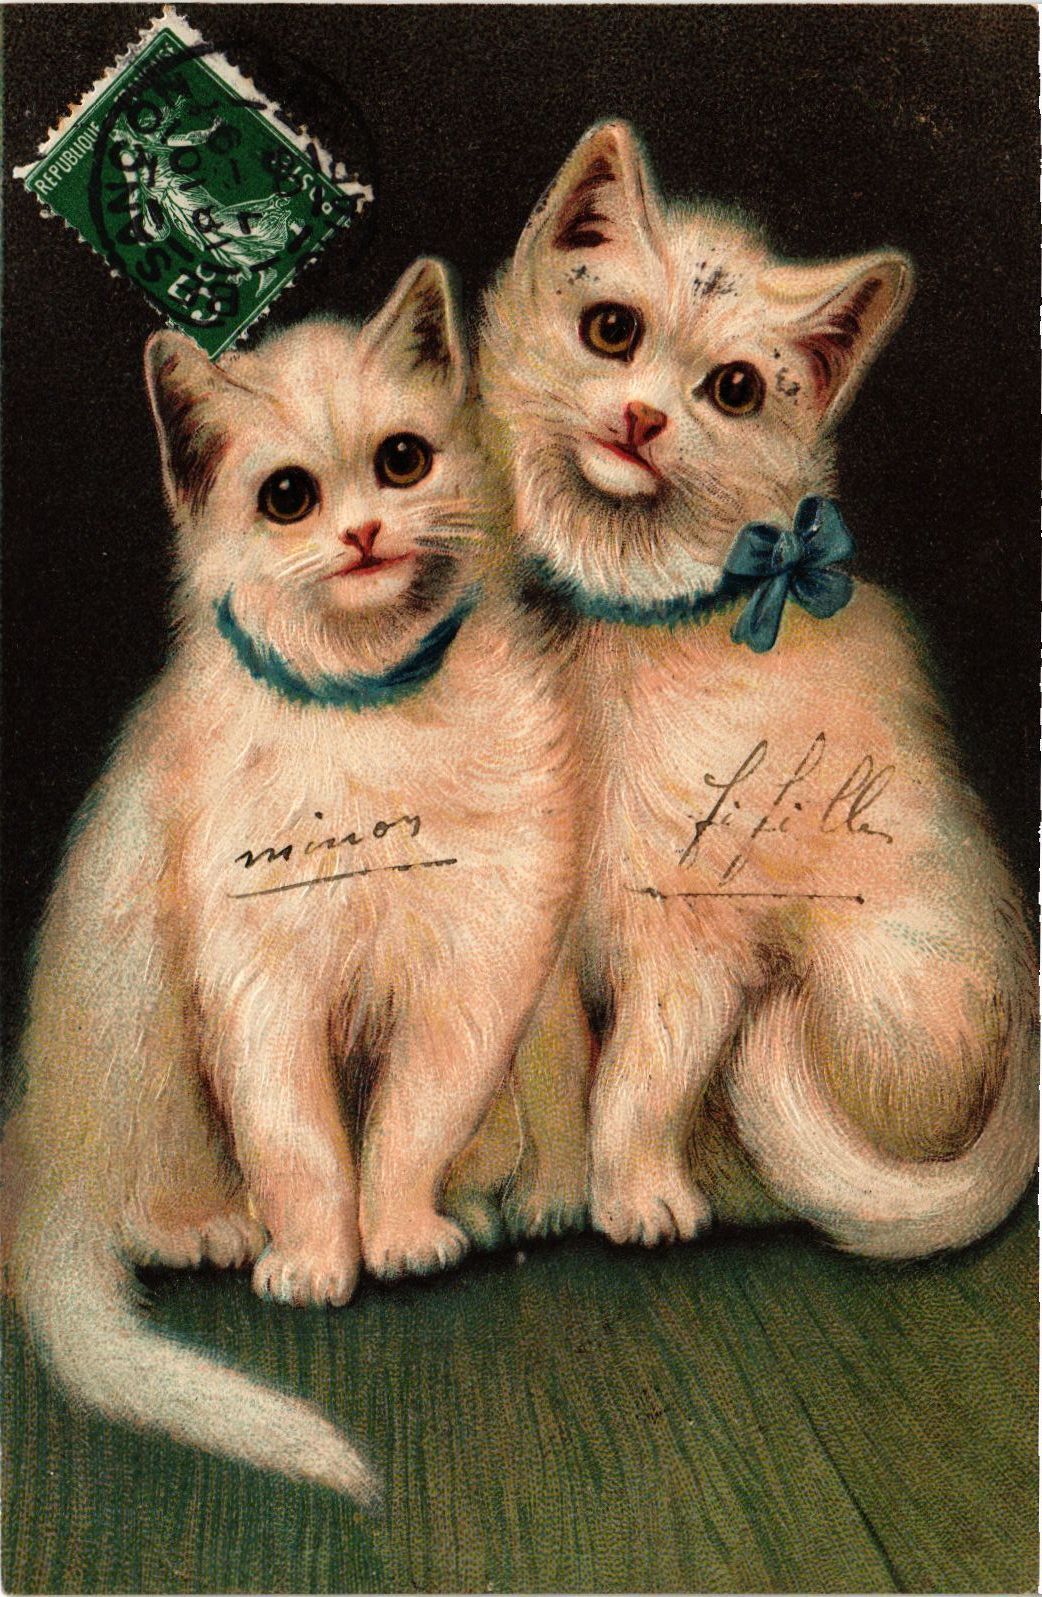 PC CPA CAT, TWO WHITE KITTY CATS SITTING, VINTAGE EMBOSSED POSTCARD (b3861)